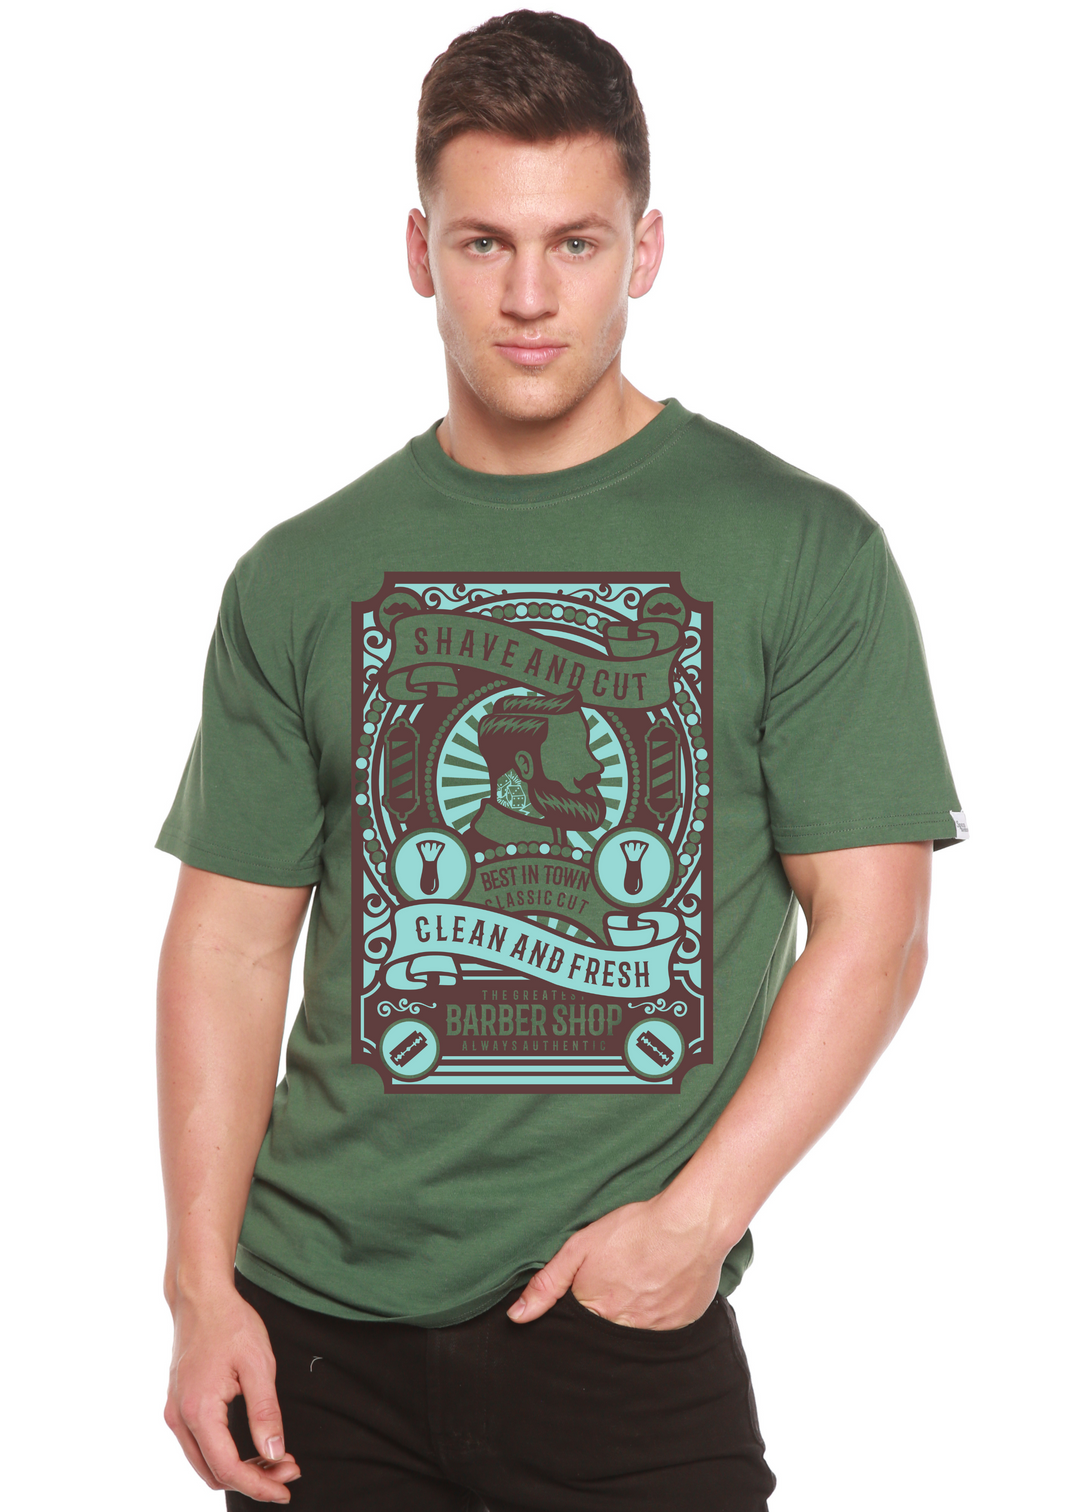 Shave and Cut men's bamboo tshirt pine green